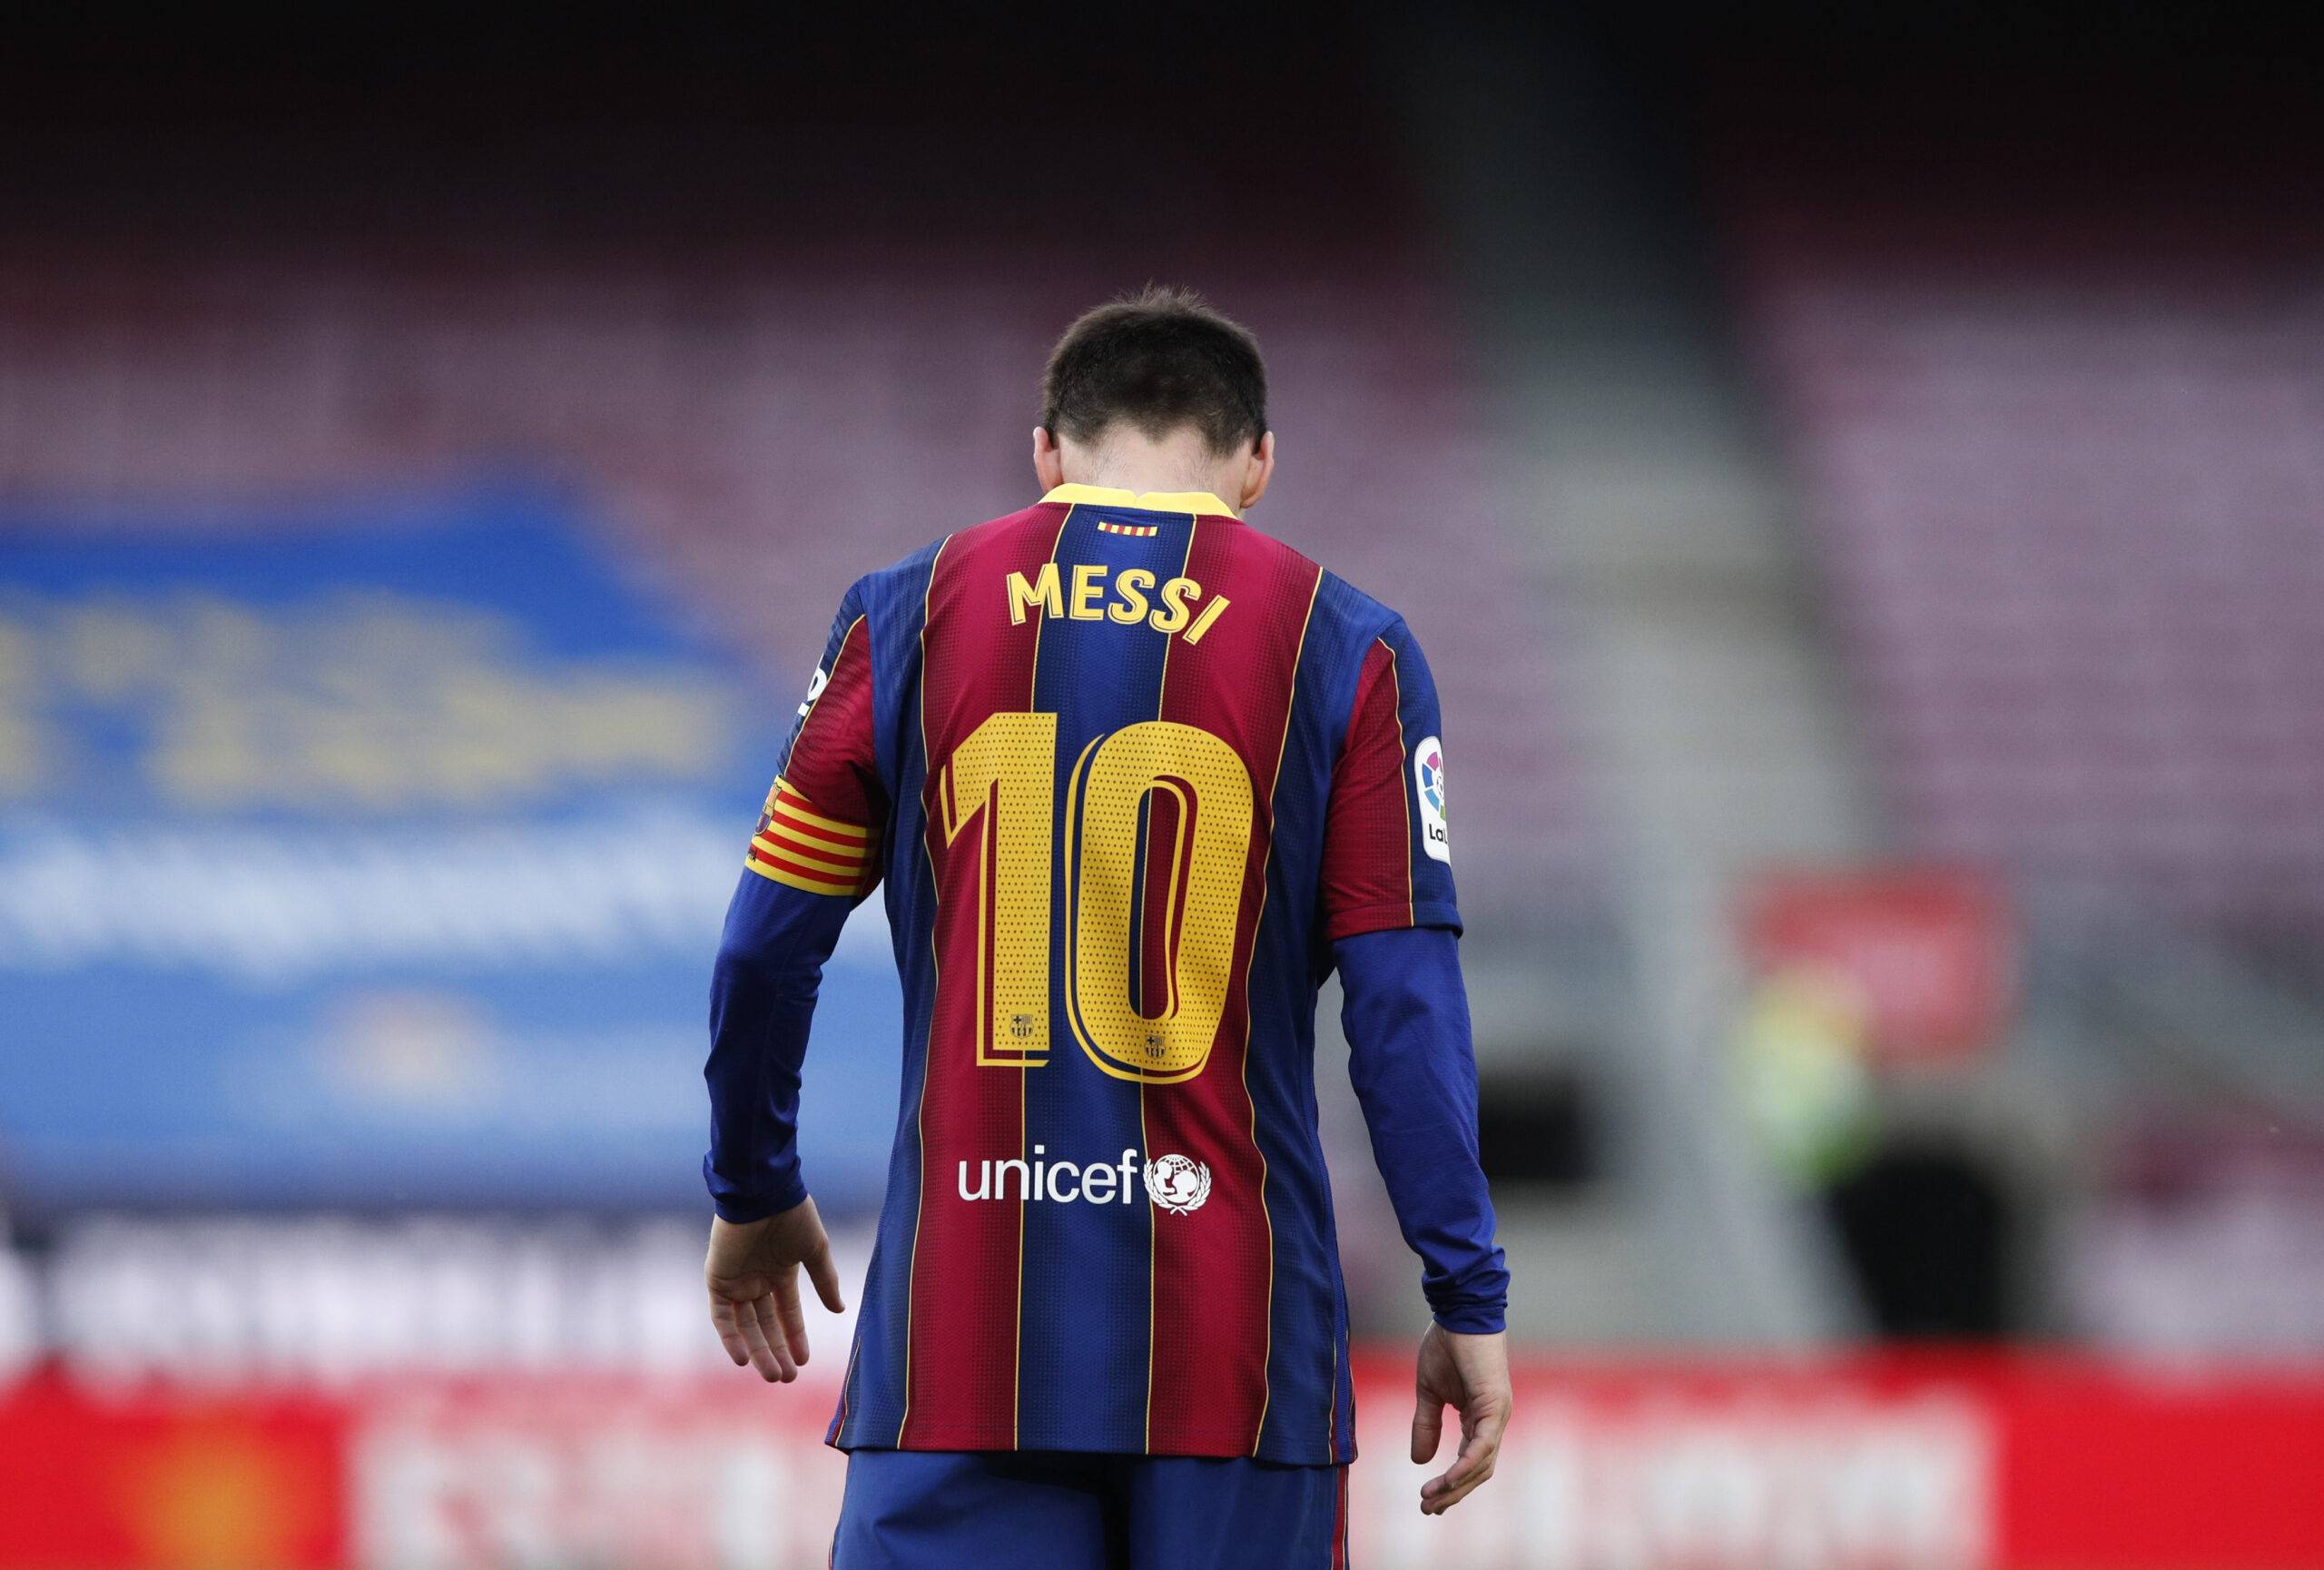 FC Barcelona announce Leo Messi will not be staying at the club